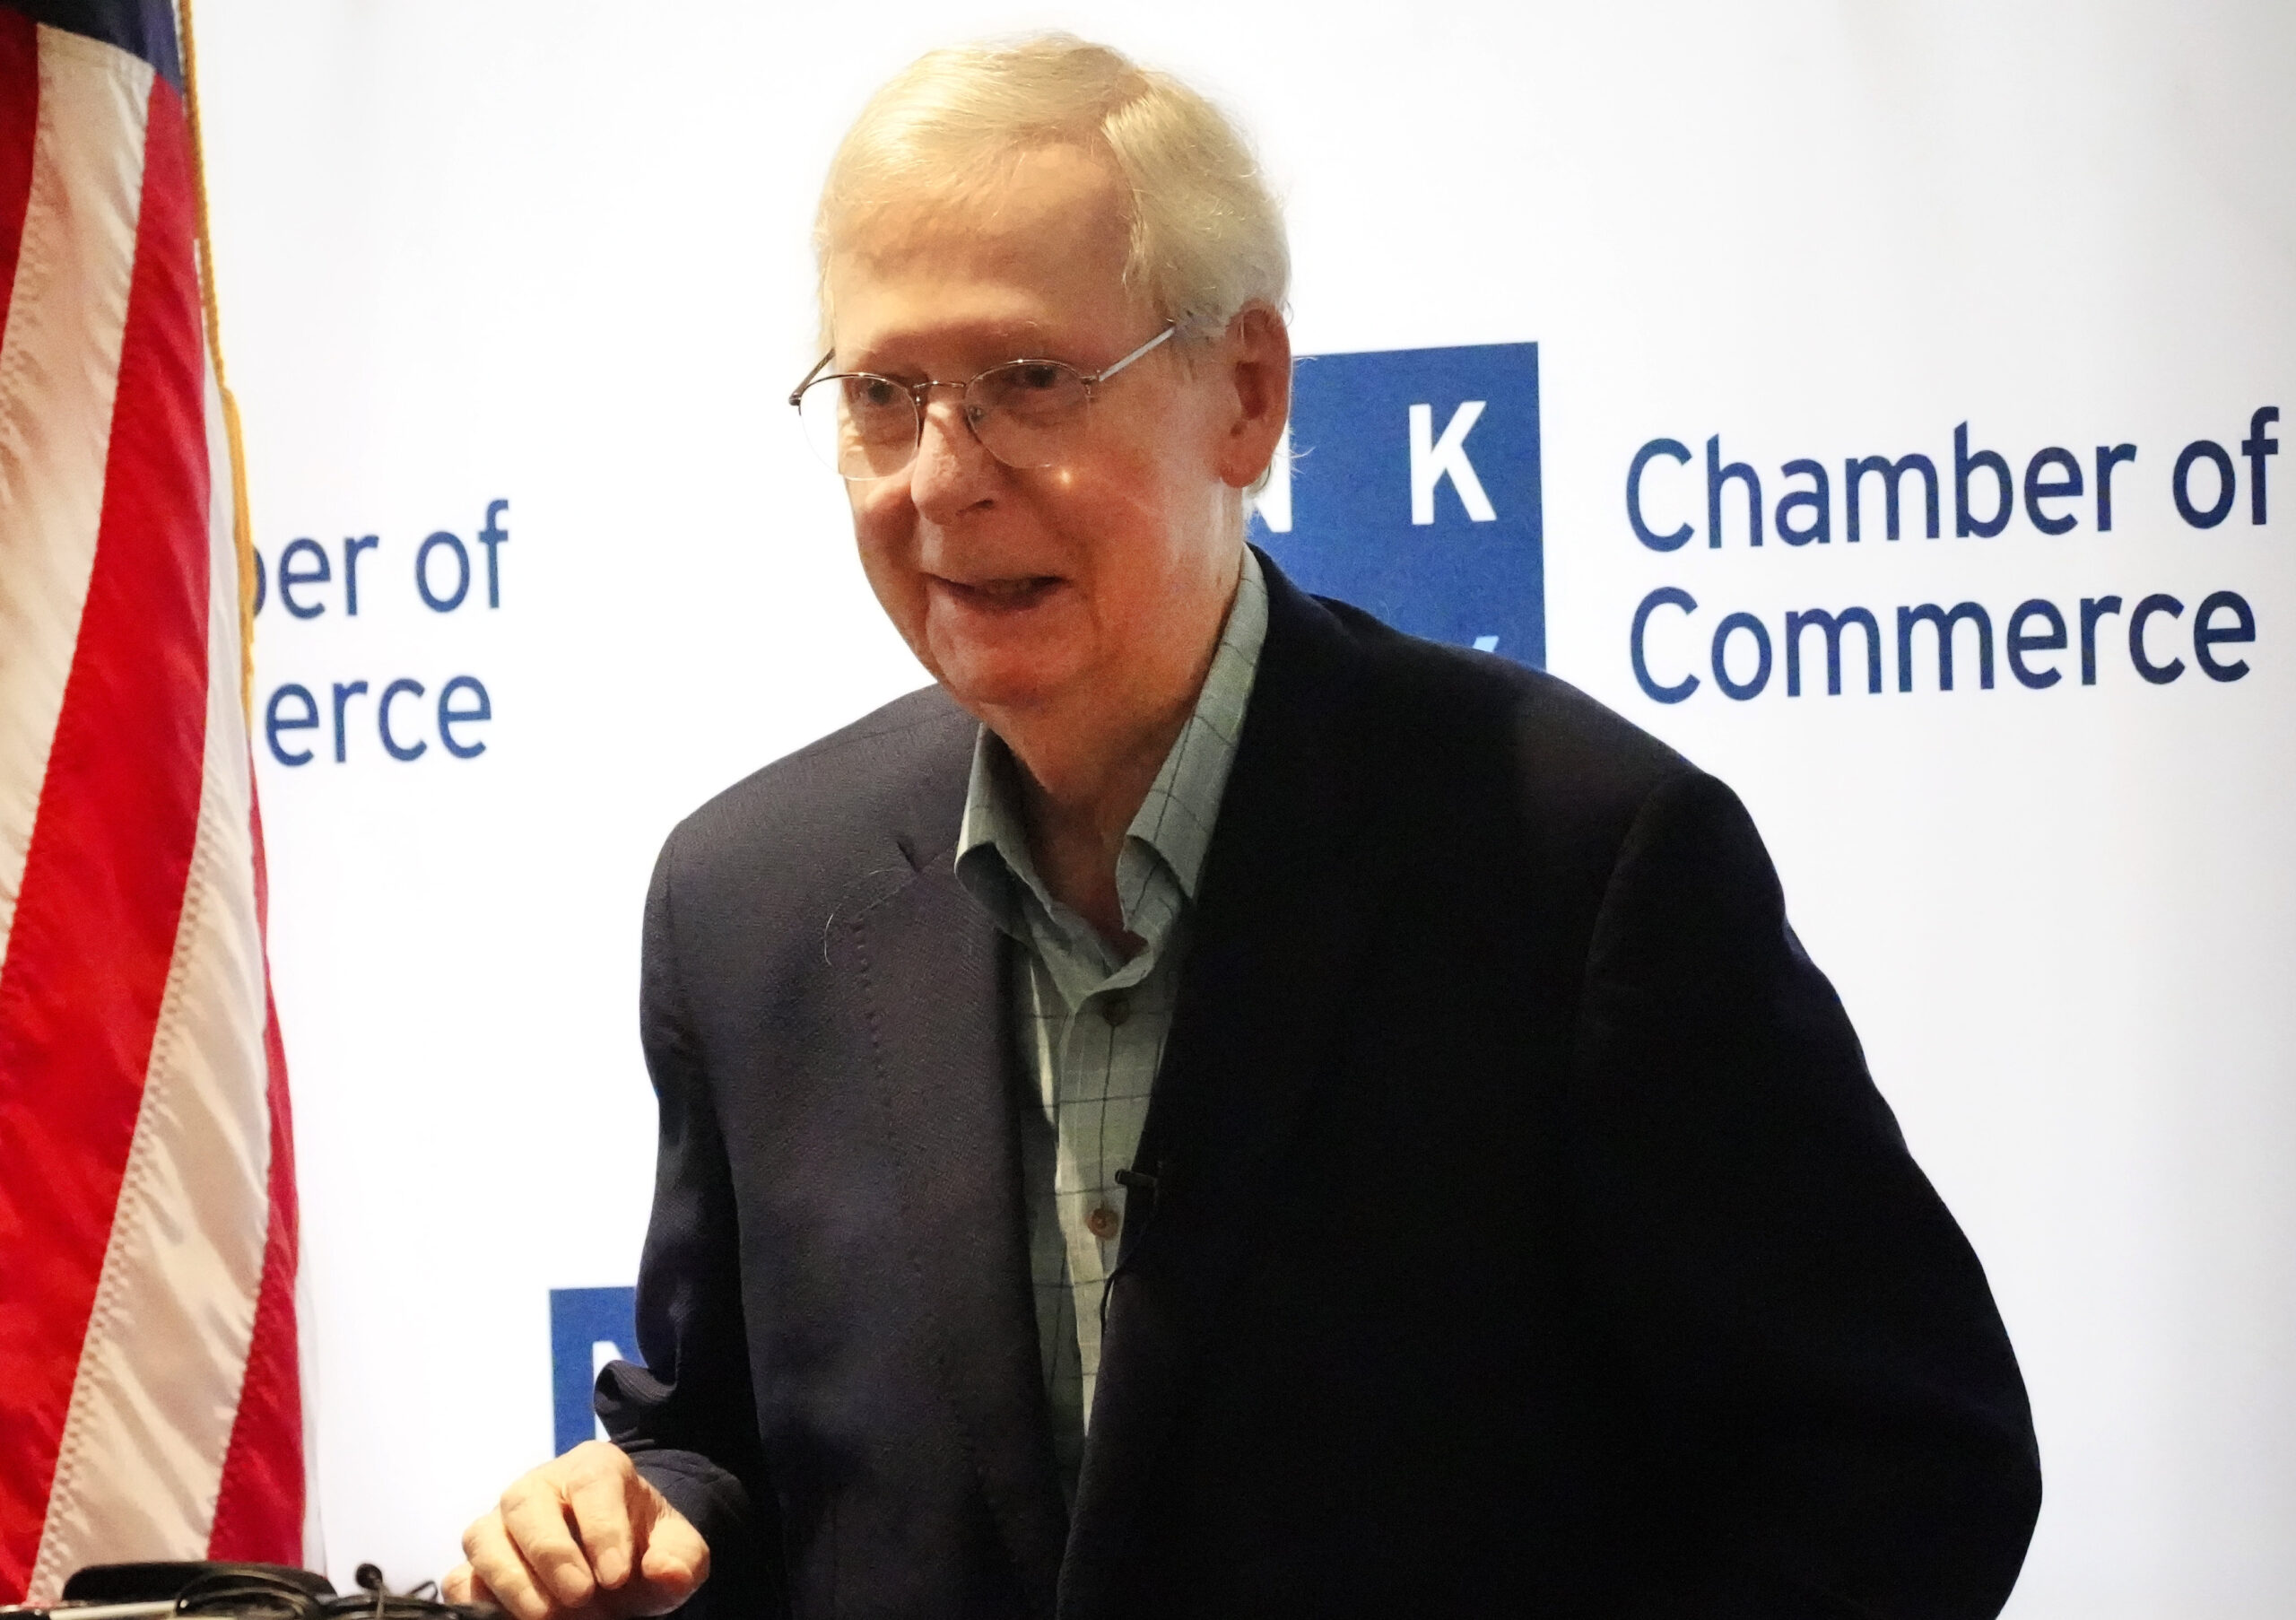 U.S. Senate Minority Leader Mitch McConnell, R-Ky., speaks at the NKY Chamber of Commerce at the Ma...